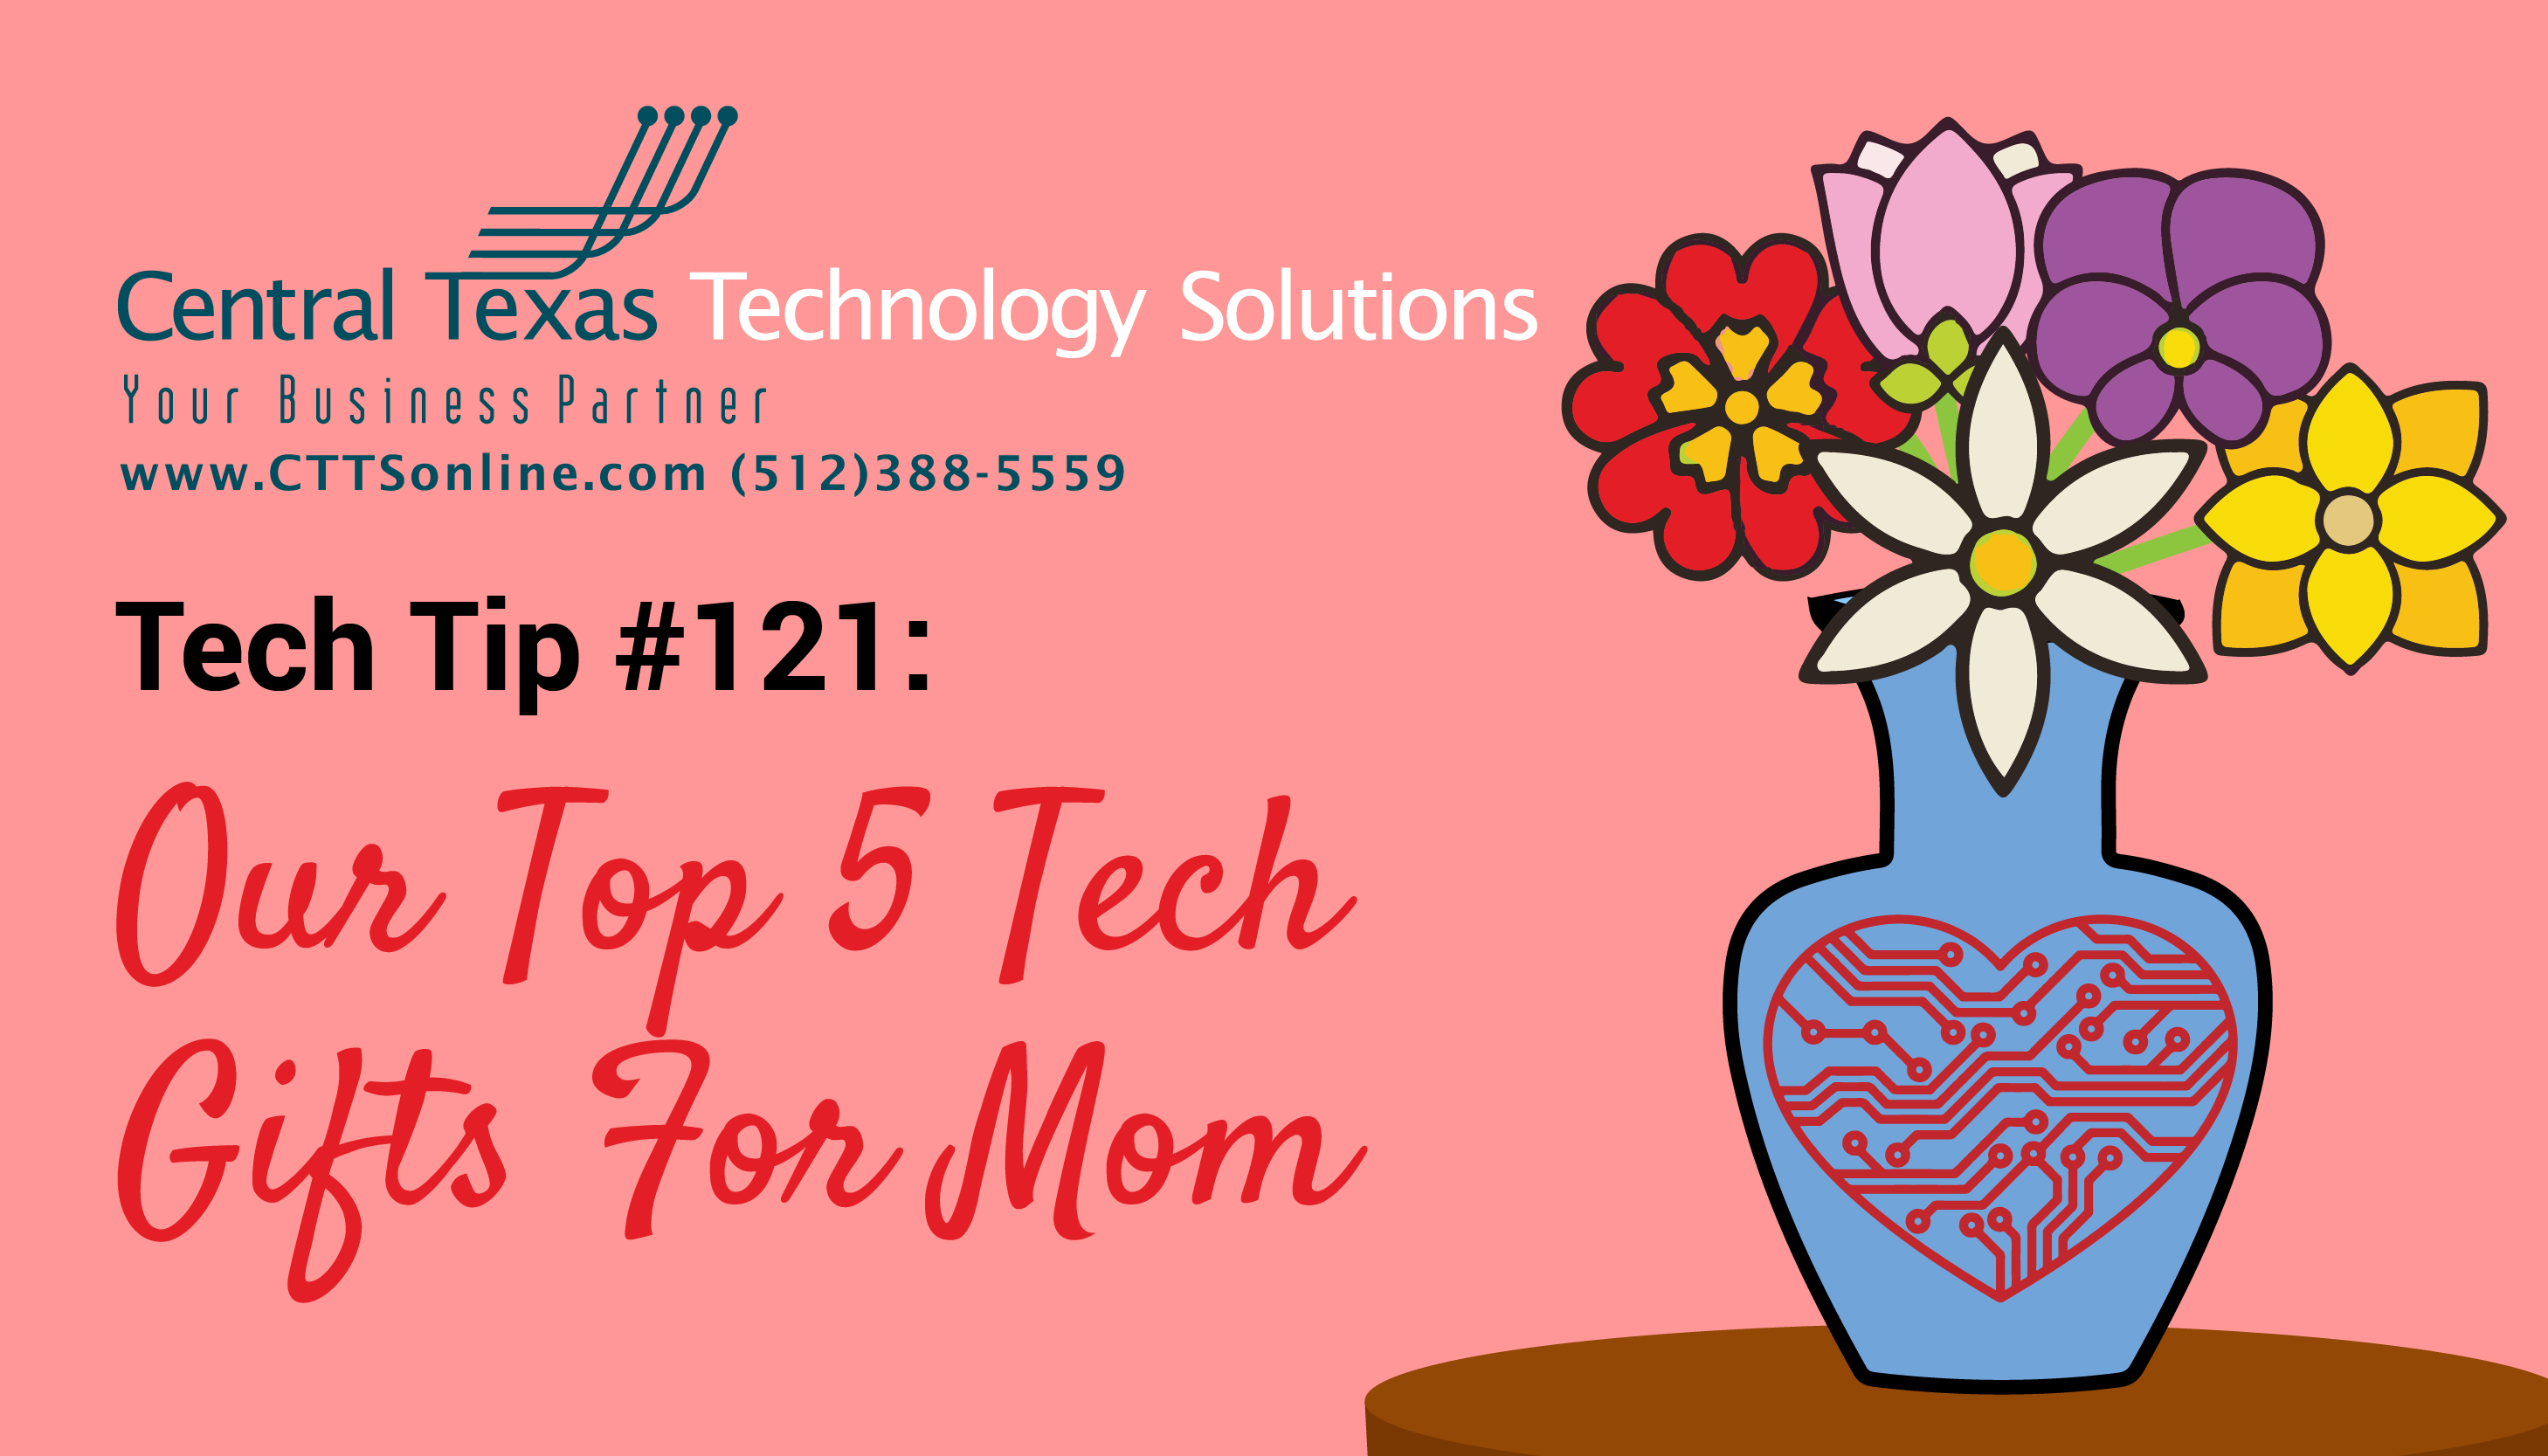 Seriously cool tech gadgets to get mom for Mother's Day